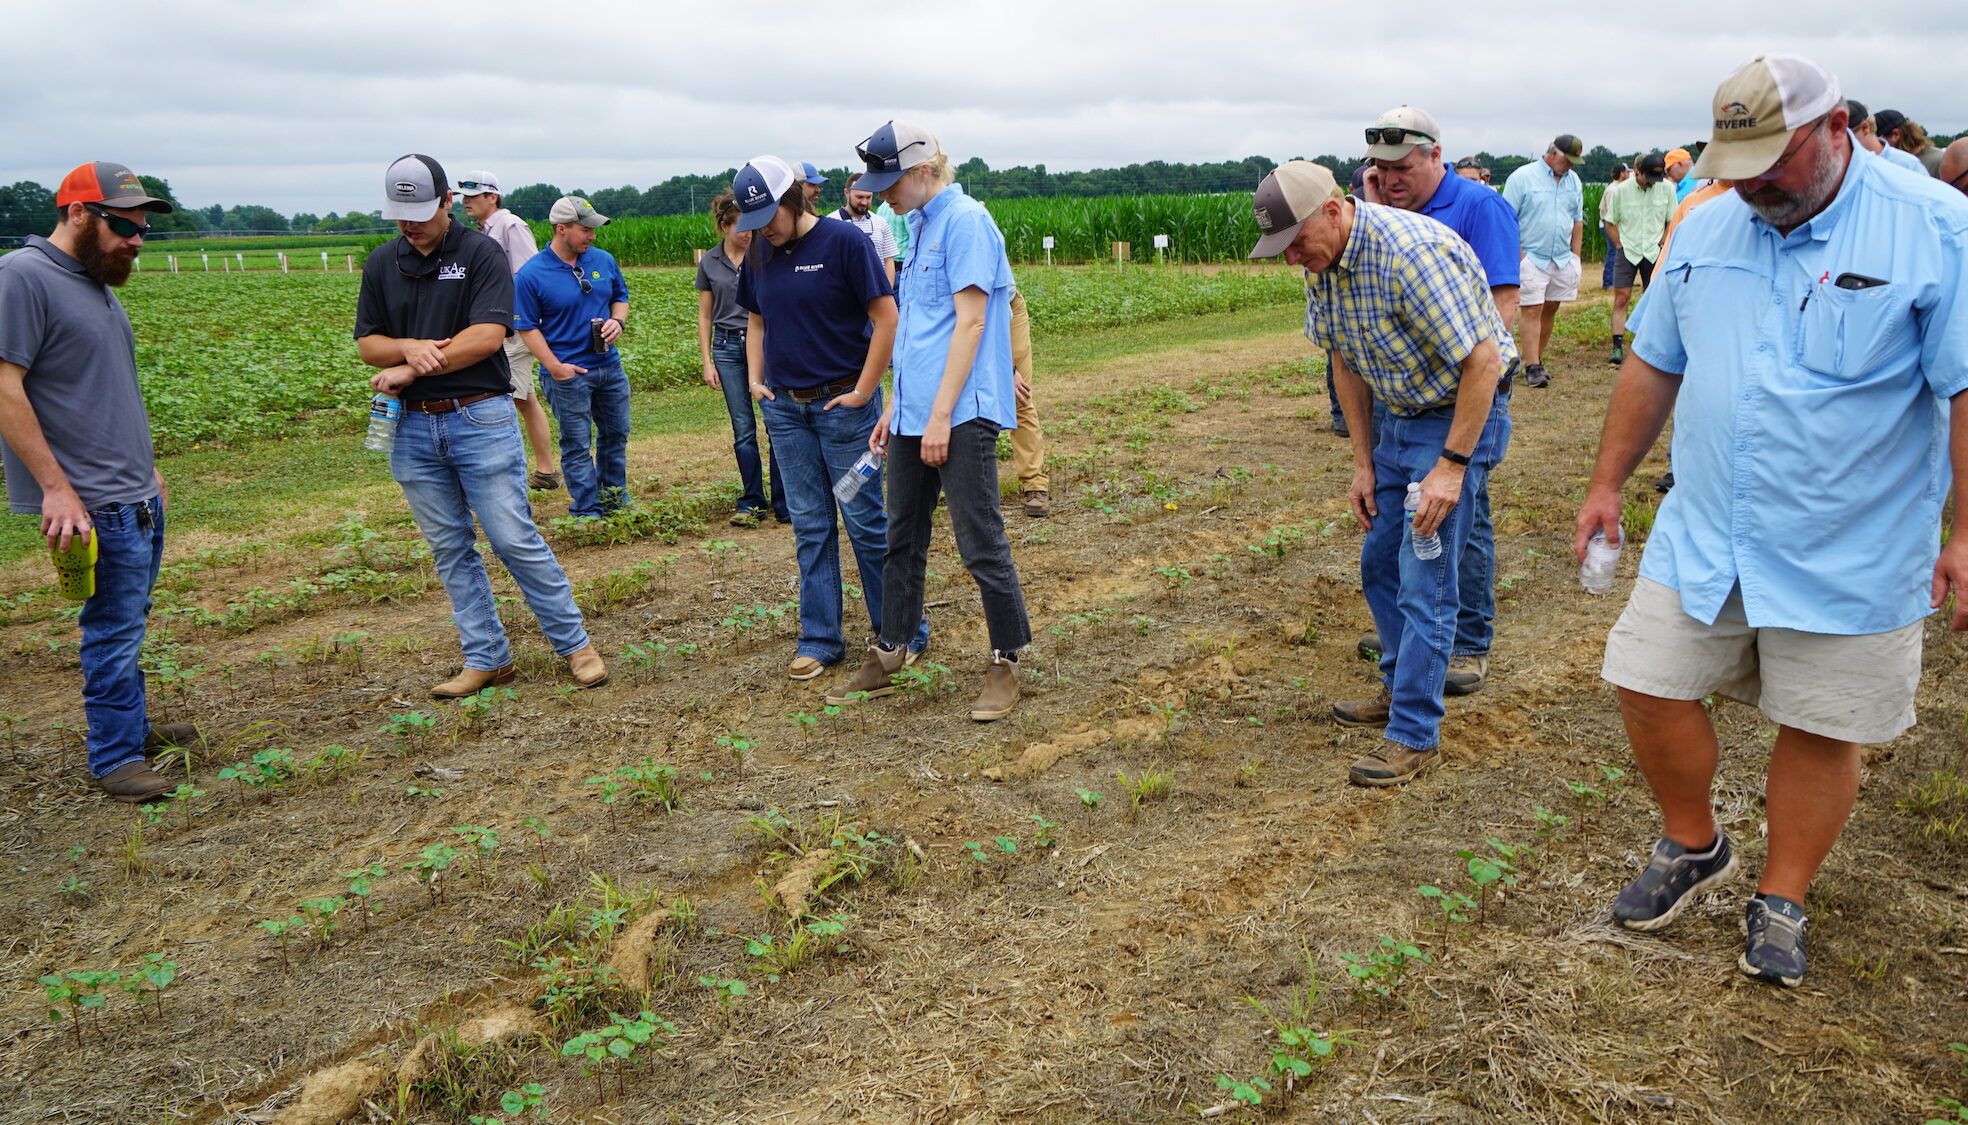 Participants at a Weed Tour in Jackson inspecting research plots.